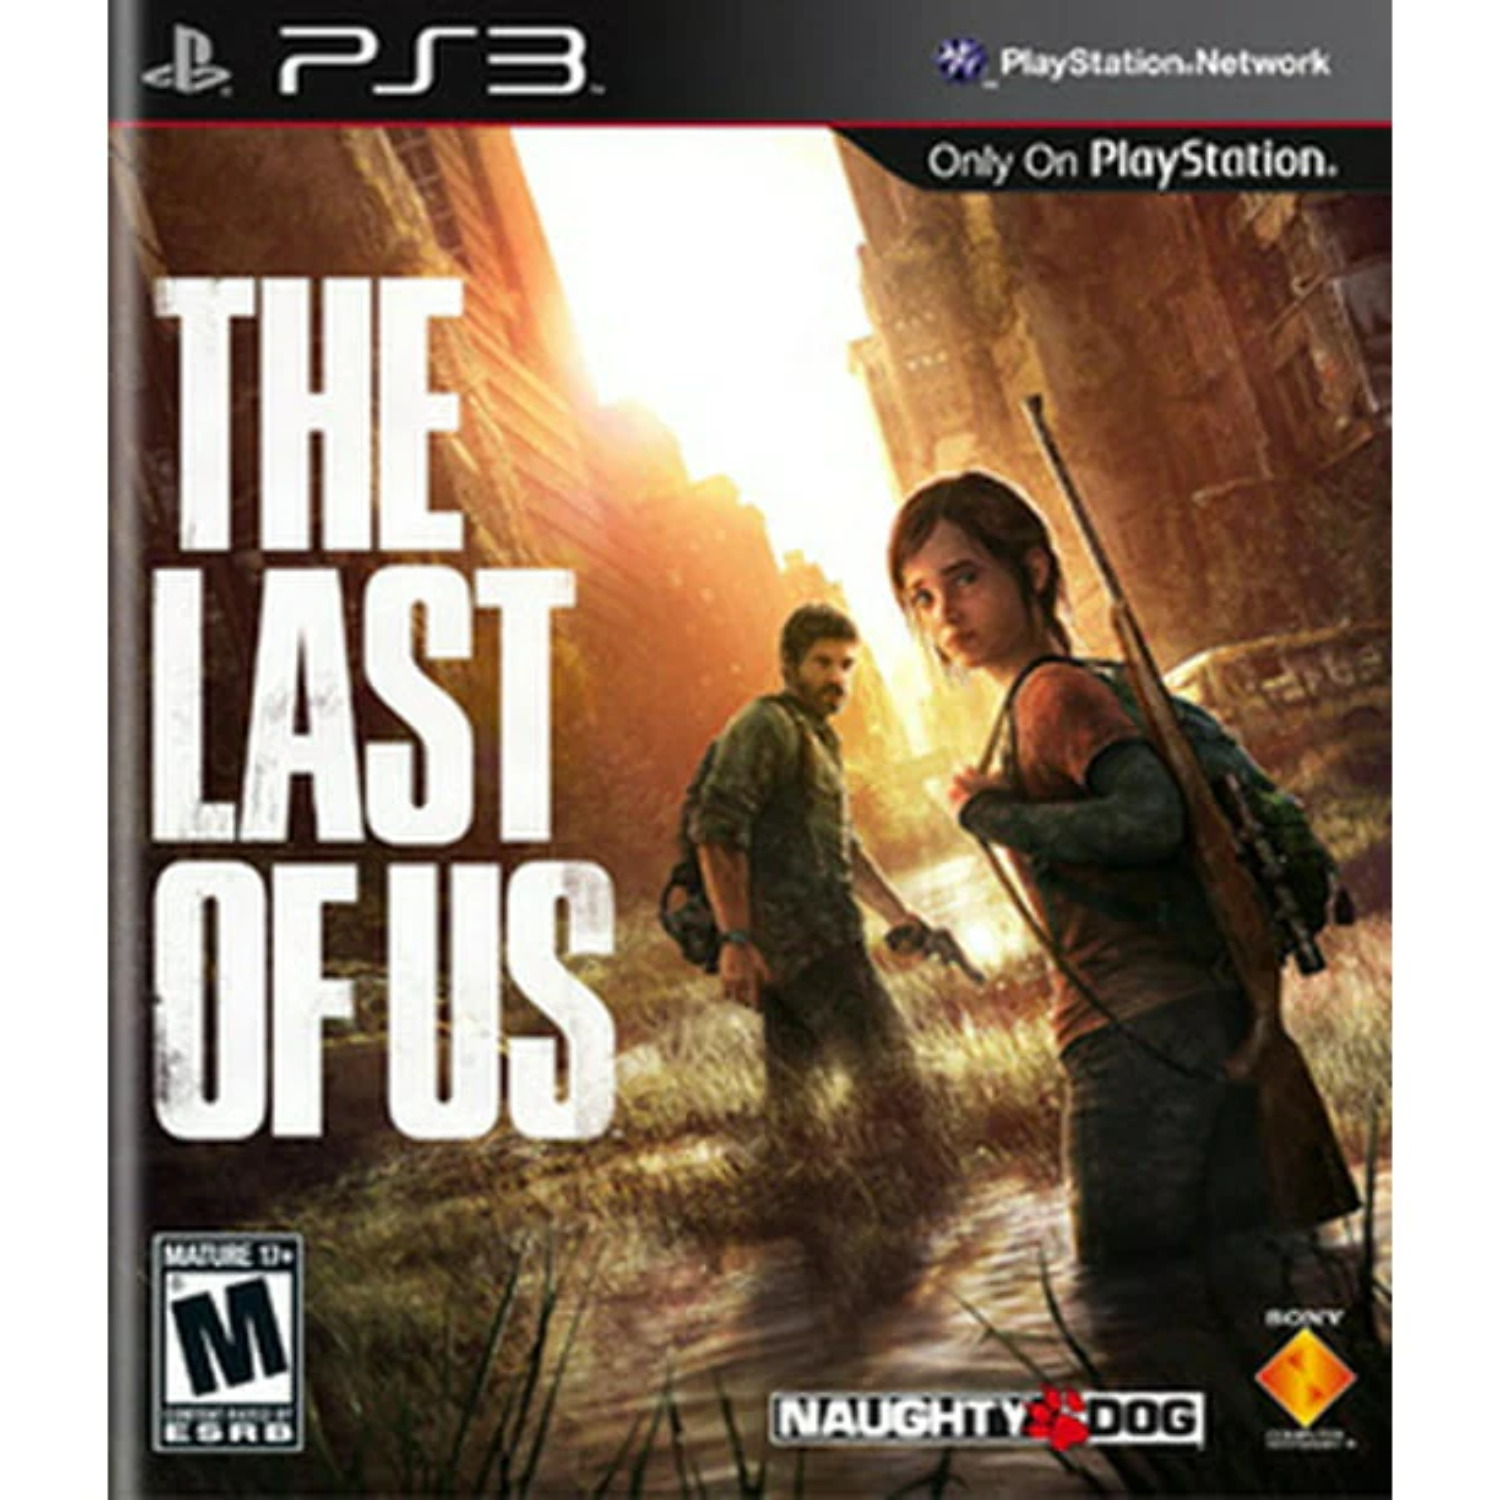 Naughty Dog Inc. The Last of Us, Sony, PlayStation 3, 711719981749 - image 1 of 36